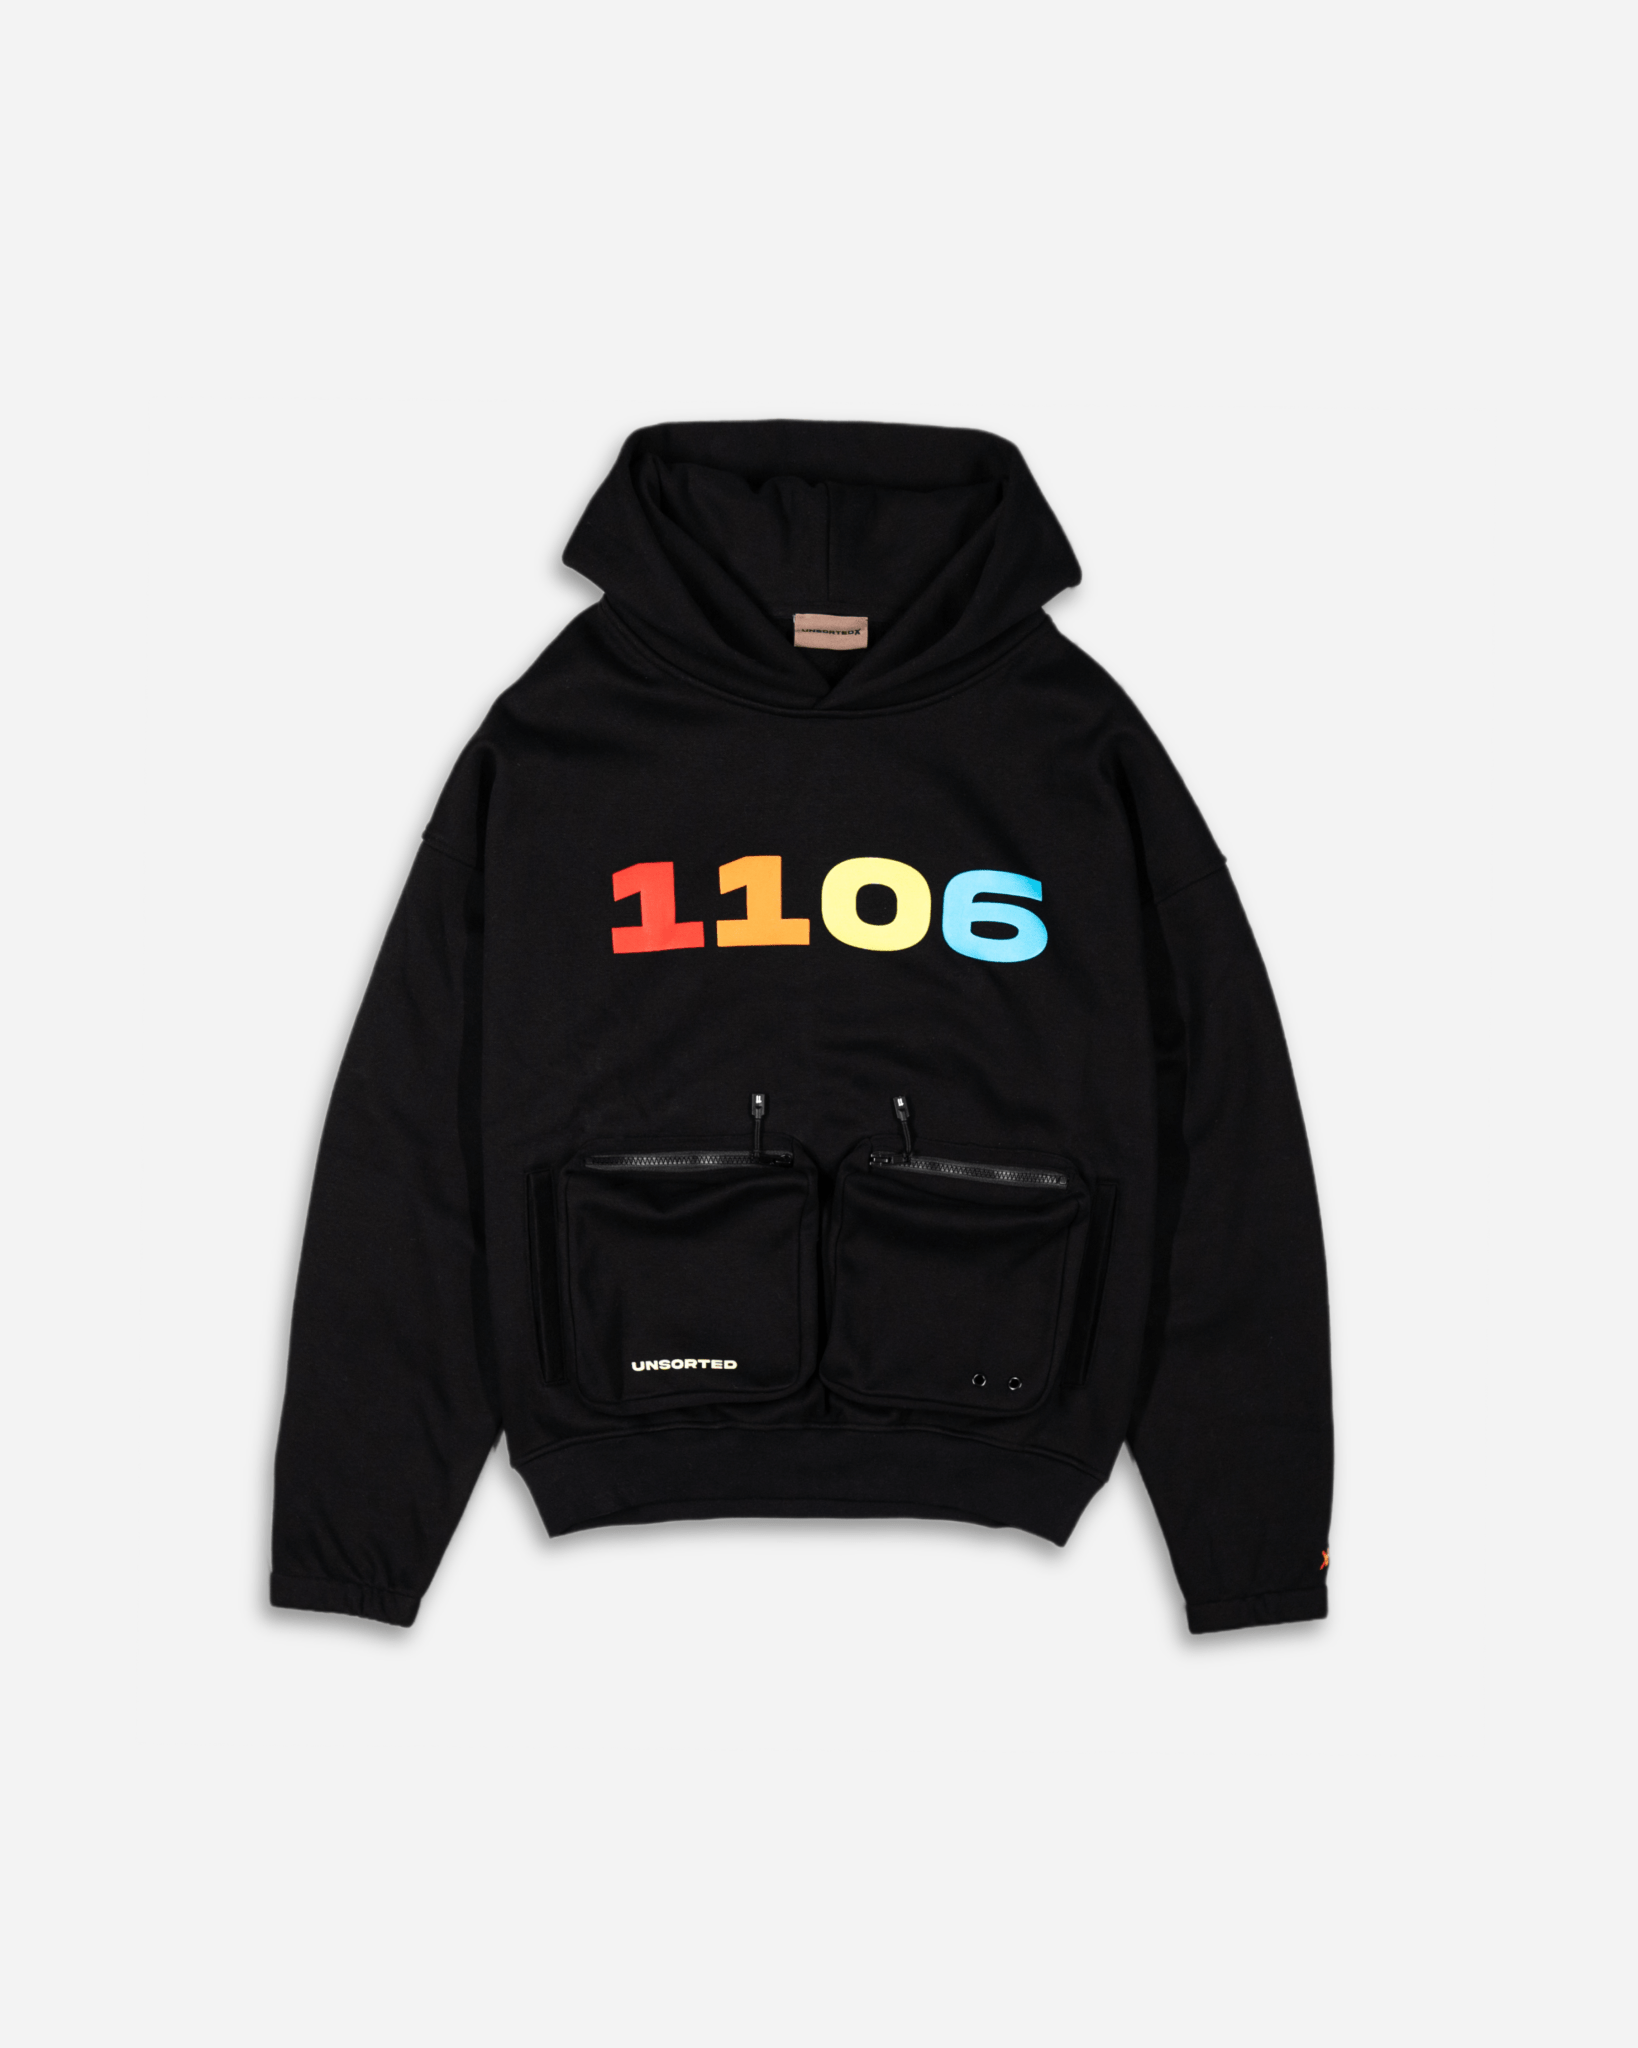 1106 CARGO HOODIE - Unsorted x